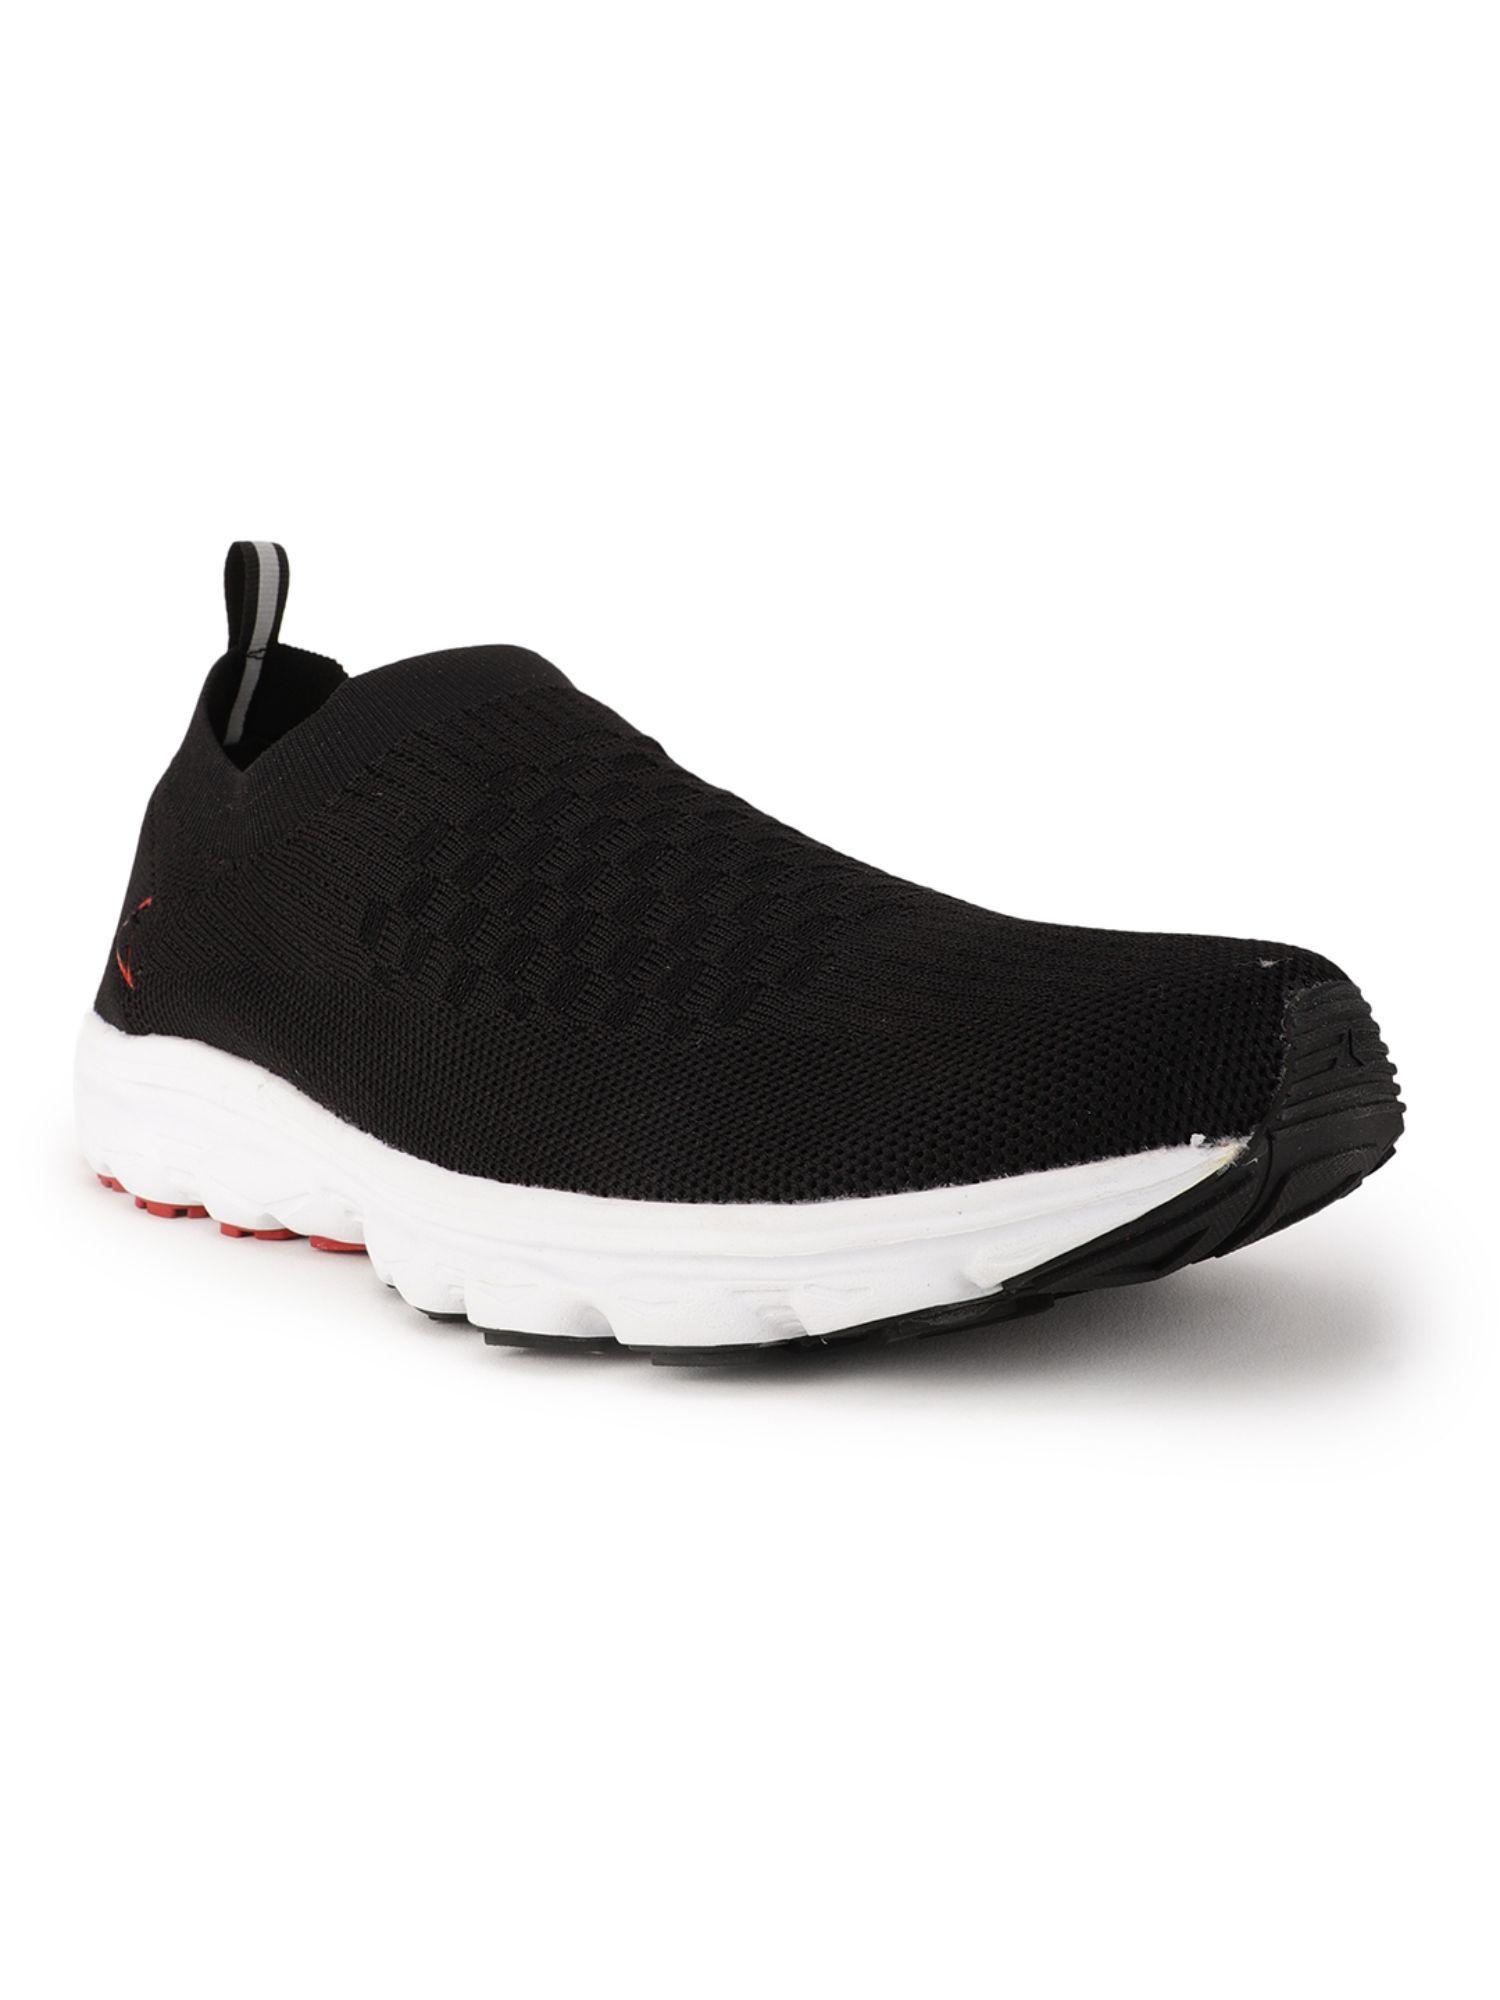 woven-black-running-shoes